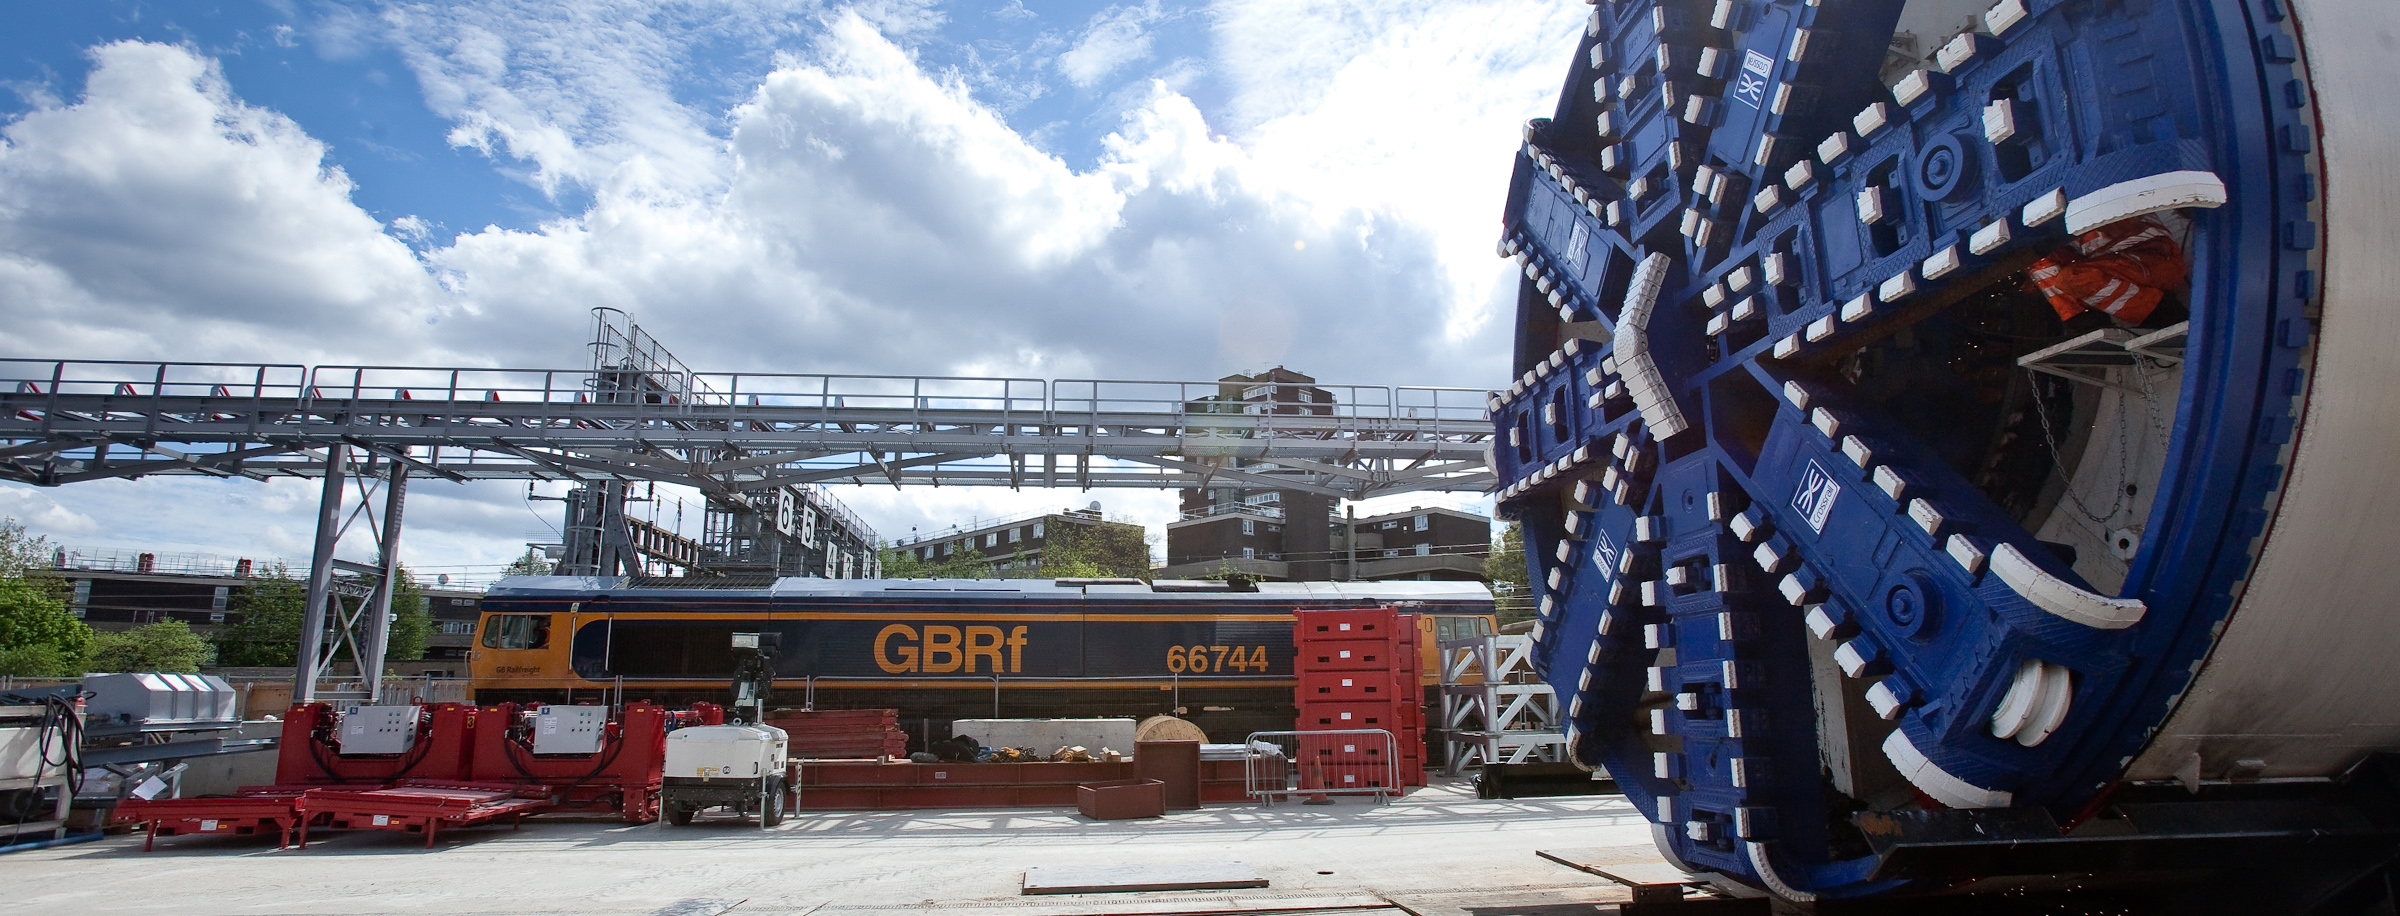 GB Railfreight celebrate signing CP6 contract with Network Rail, marking increased role across the UK’s rail network